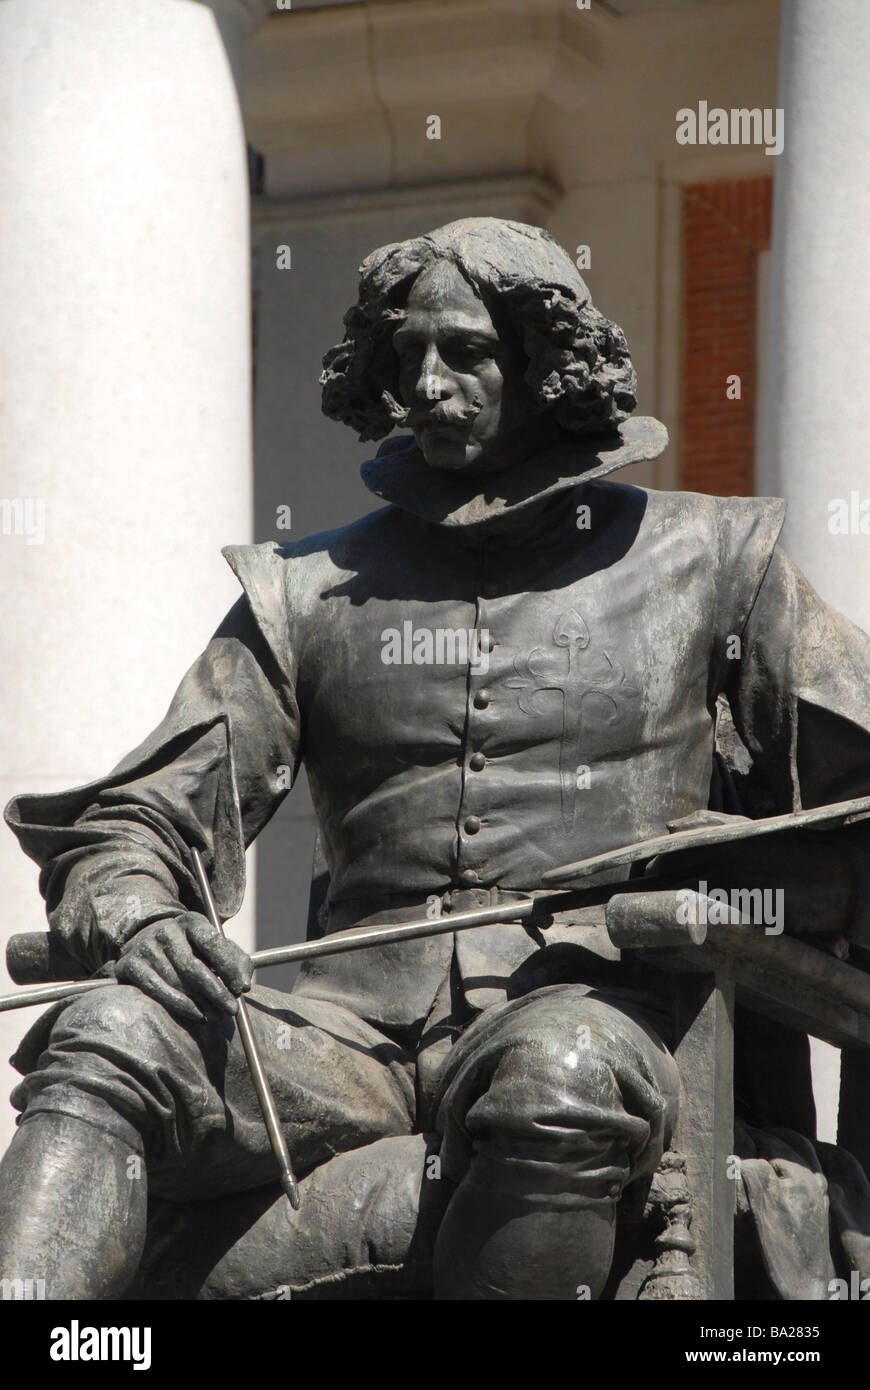 the statue of Diego de Velázquez (1599-1660) by sculptor Aniceto Marinas, located in front of the main façade of the Prado Museum Madrid Spain Stock Photo